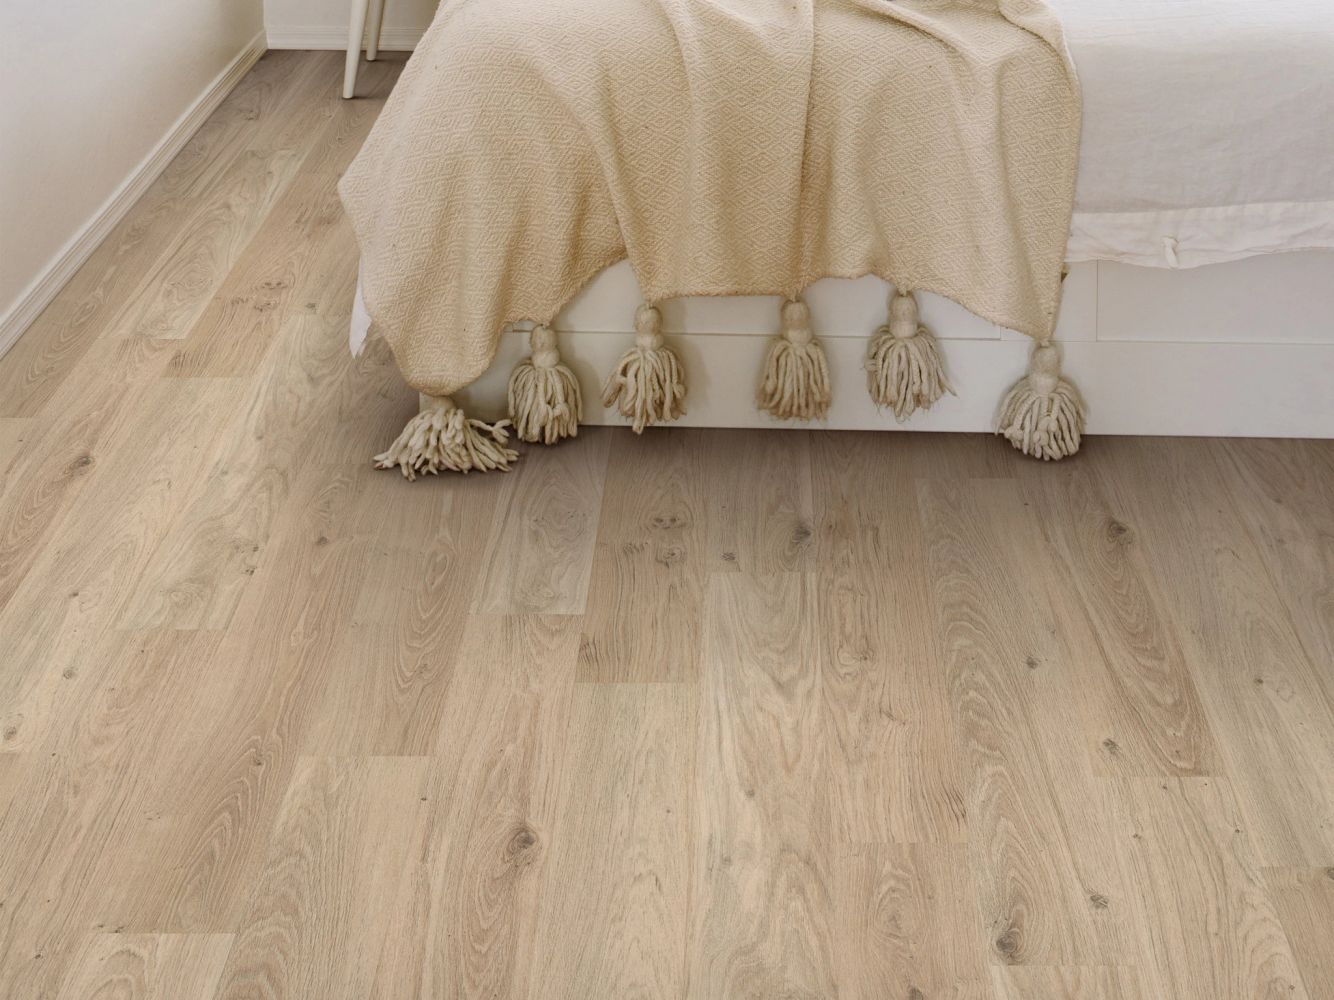 Shaw Floors Resilient Residential Praxis Plank Expose 02045_3039V